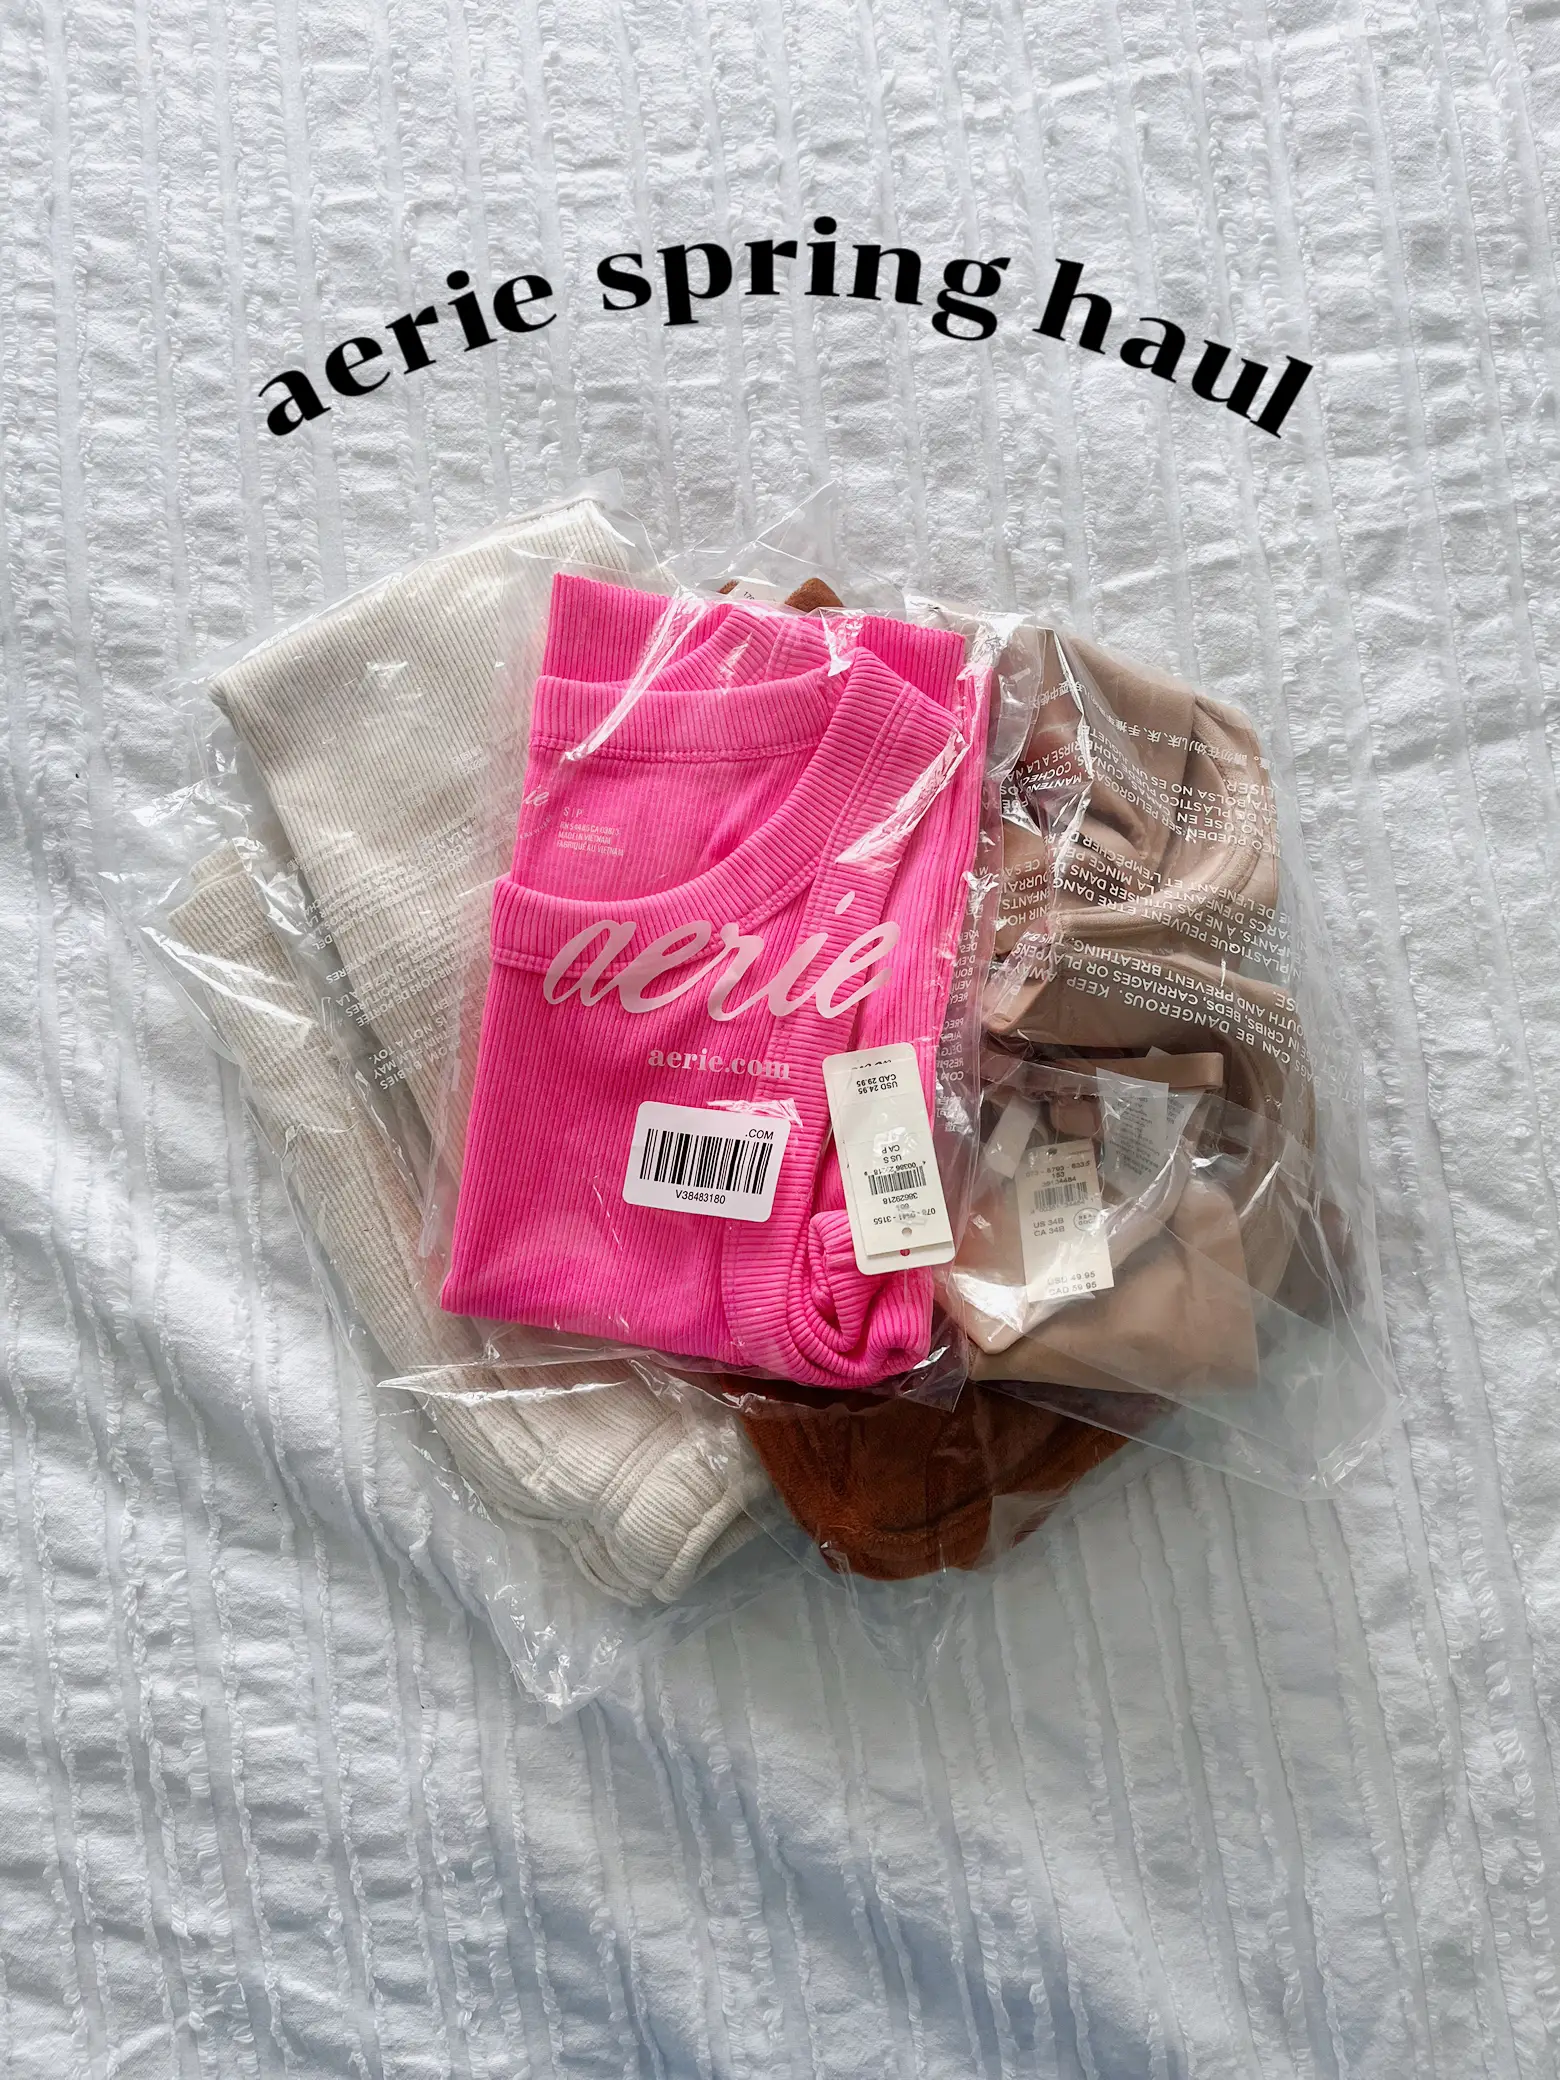 Aerie Try-On Haul, Gallery posted by Caitlin Farrand